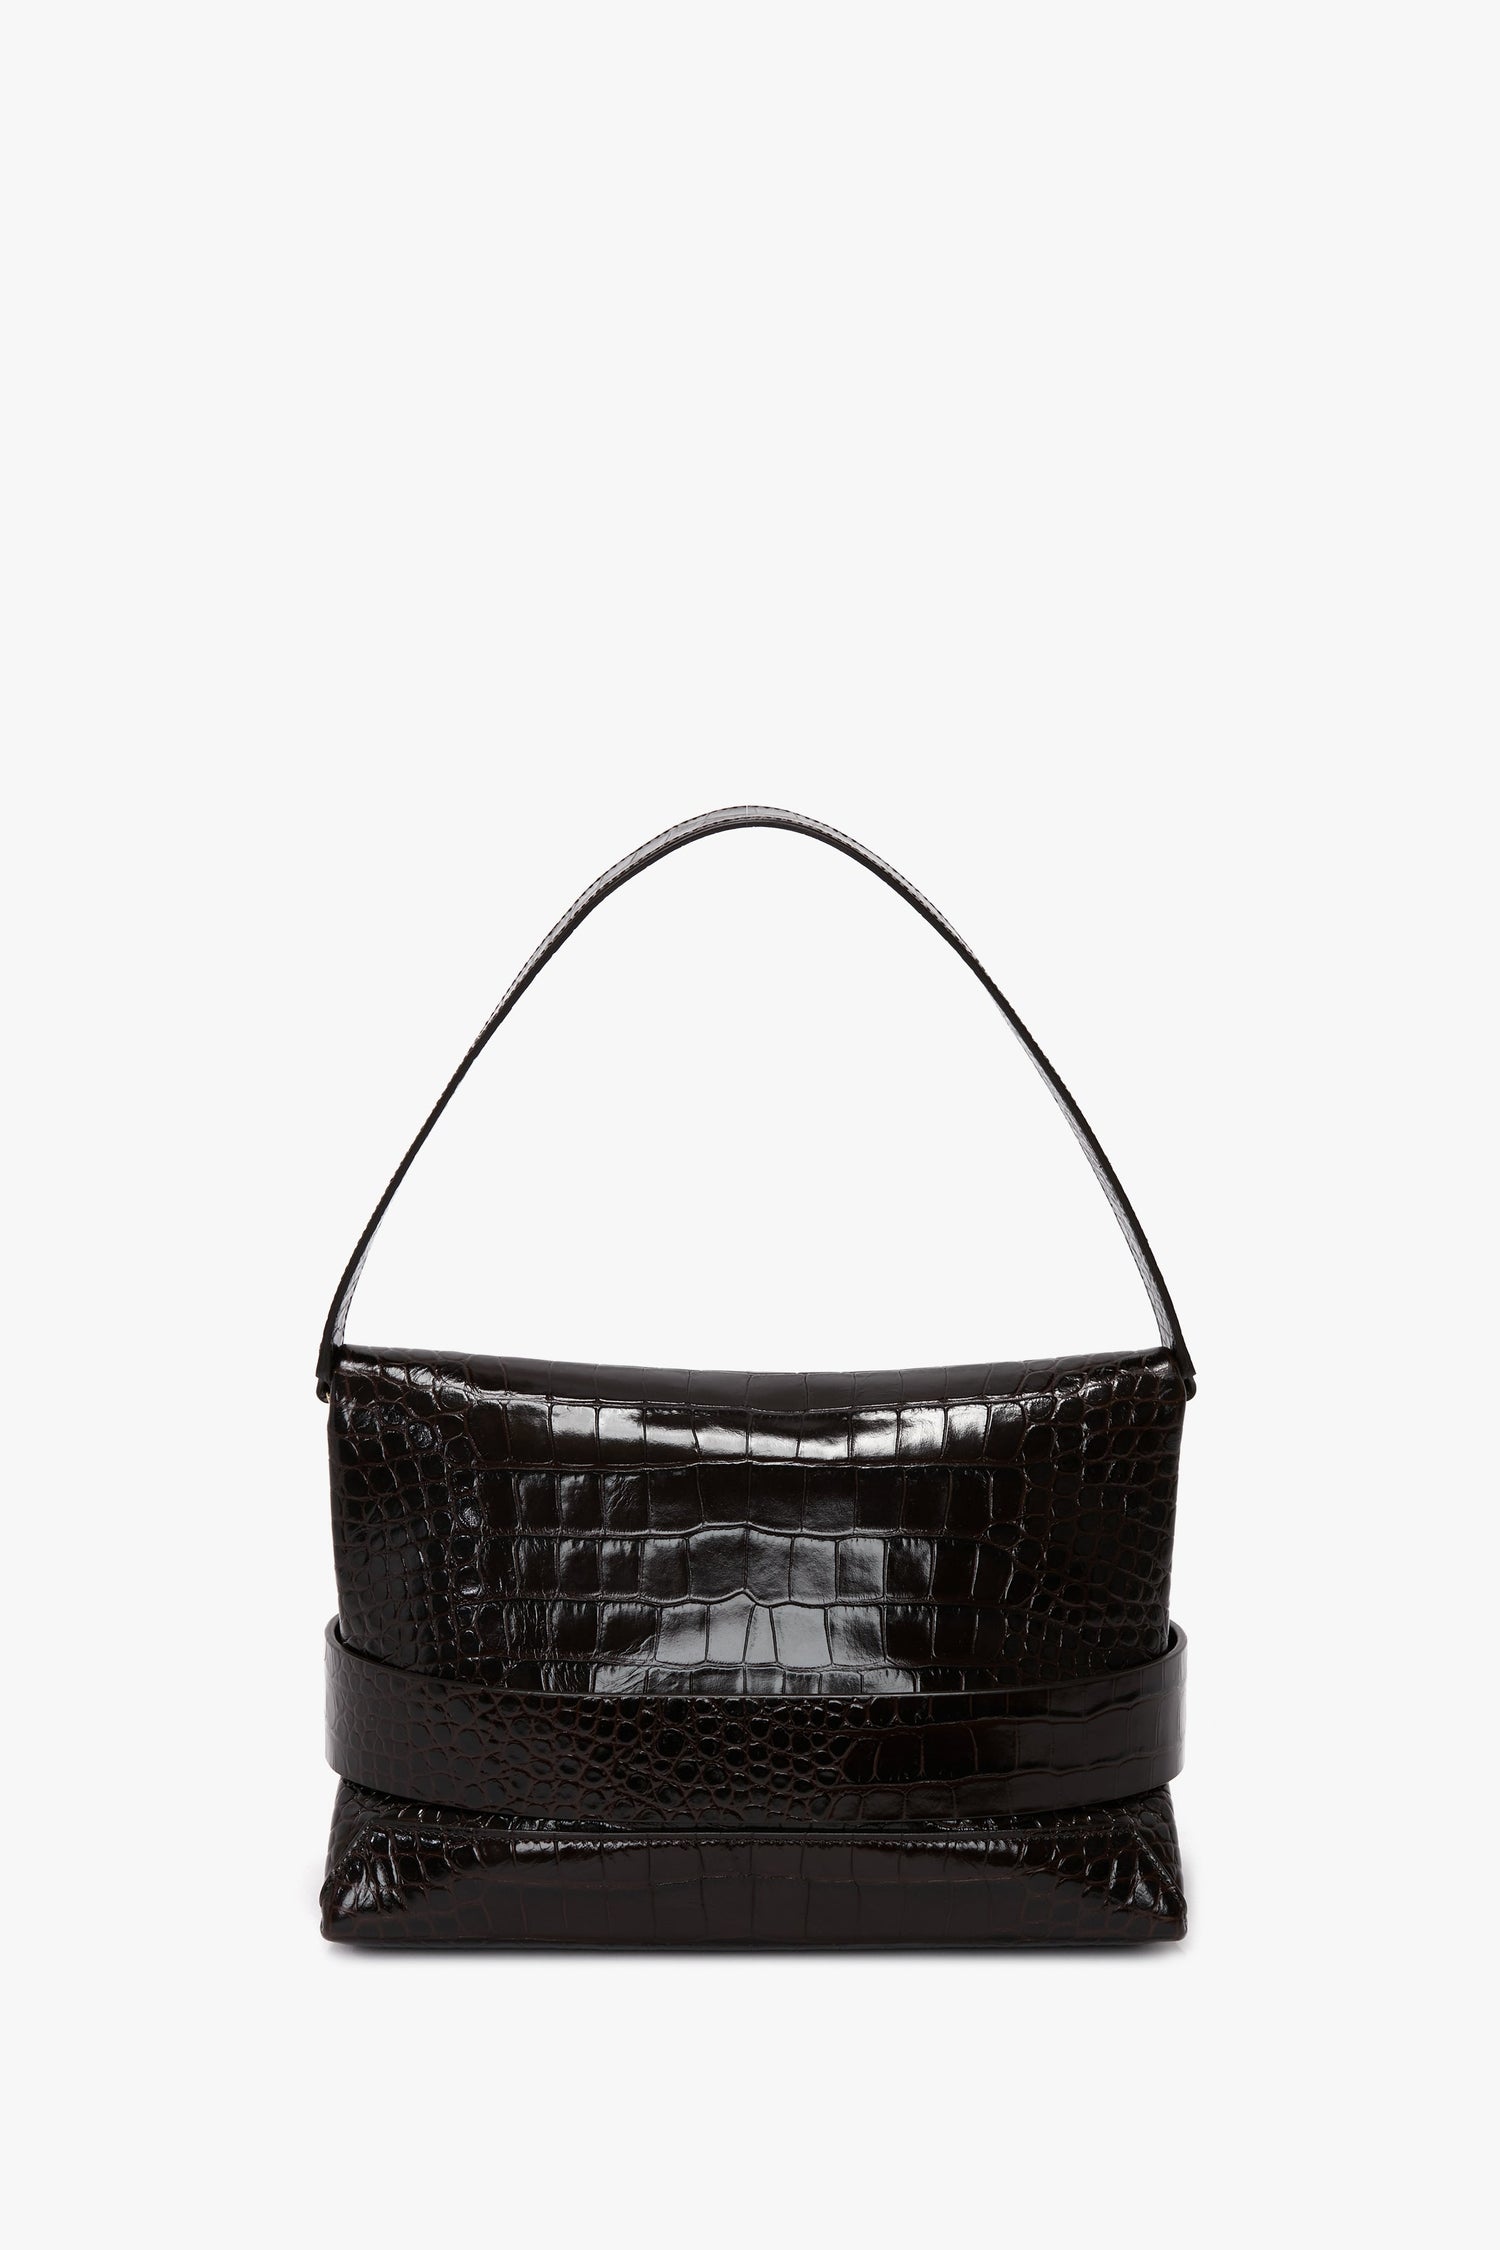 The B Pouch Bag In Croc Effect Espresso Leather by Victoria Beckham is made of calf leather with an embossed crocodile print, featuring a single handle, a structured rectangular shape, and a detachable shoulder strap.